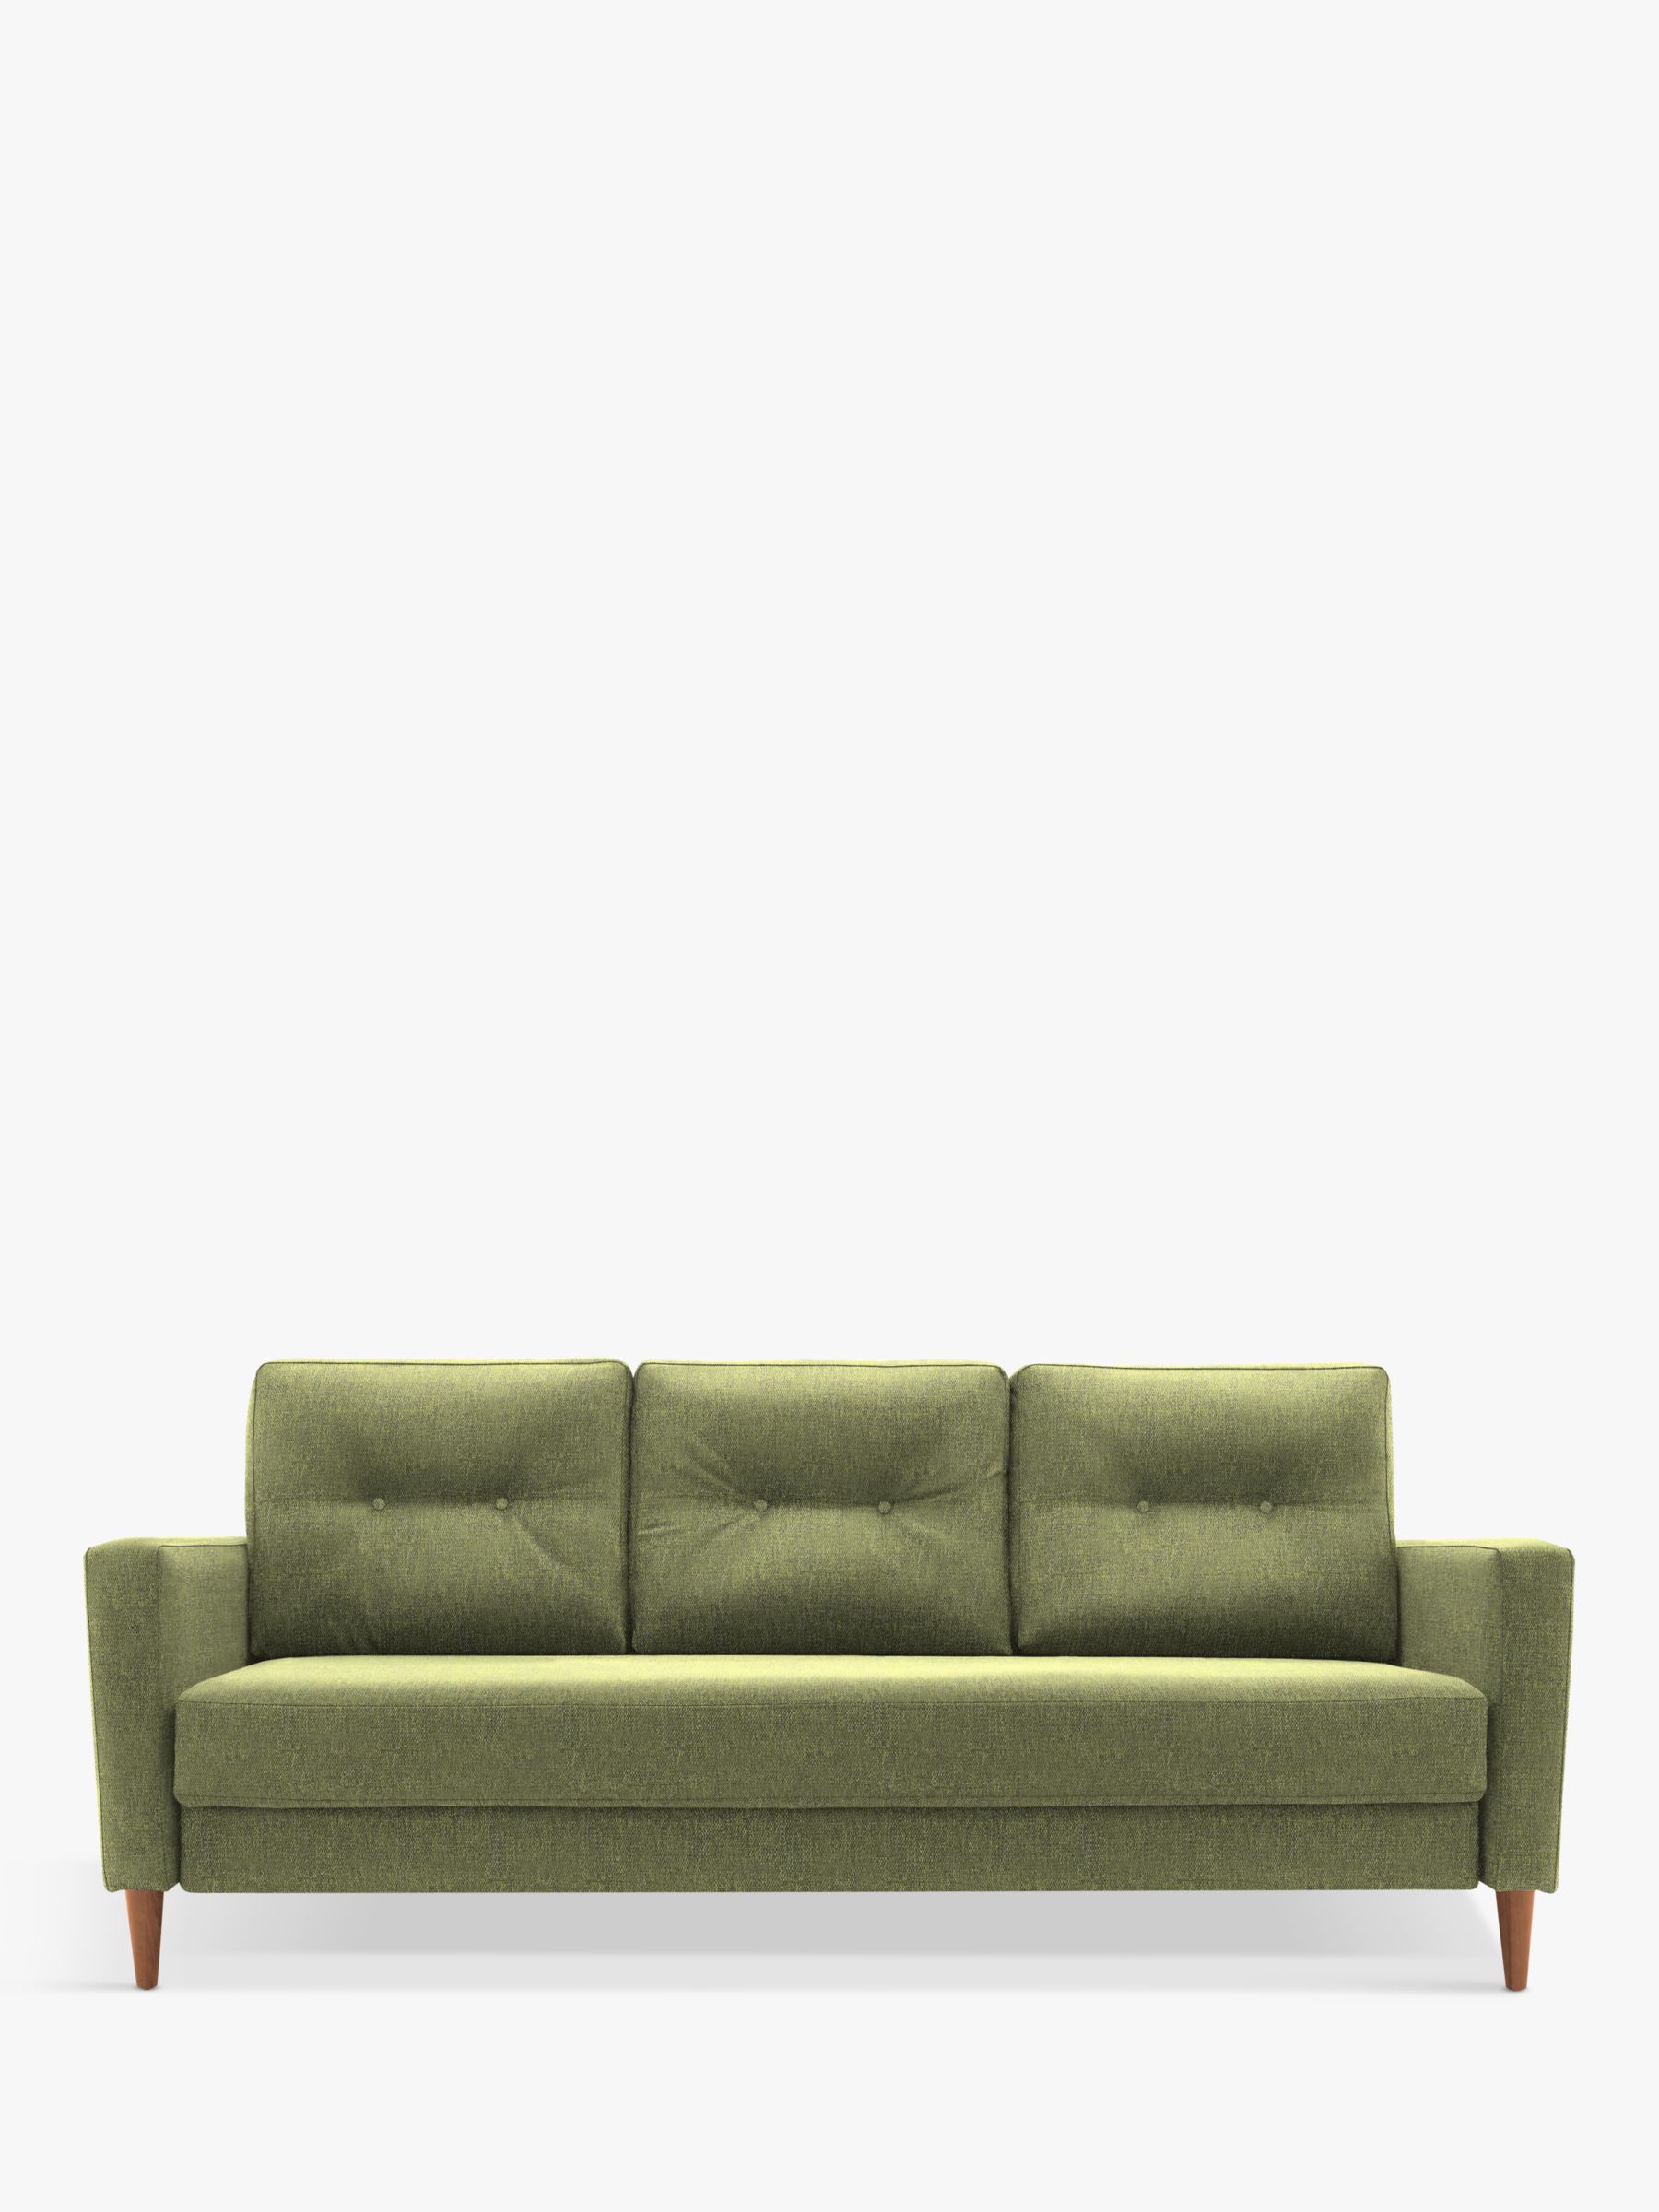 The Fifty Four Range, G Plan Vintage The Fifty Four Large 3 Seater Sofa Bed, Marl Green